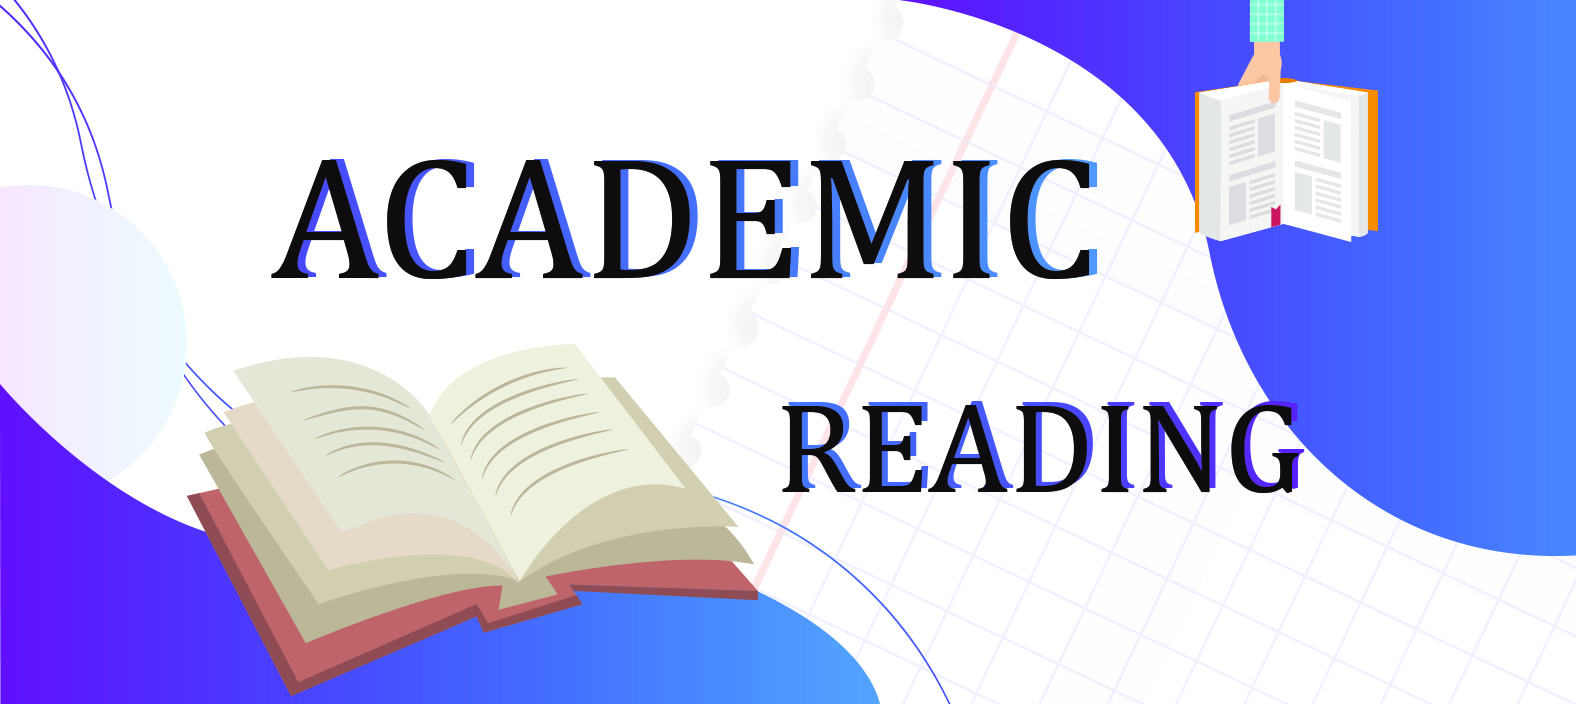 Academic Reading  CCDKM_AcademicEng01